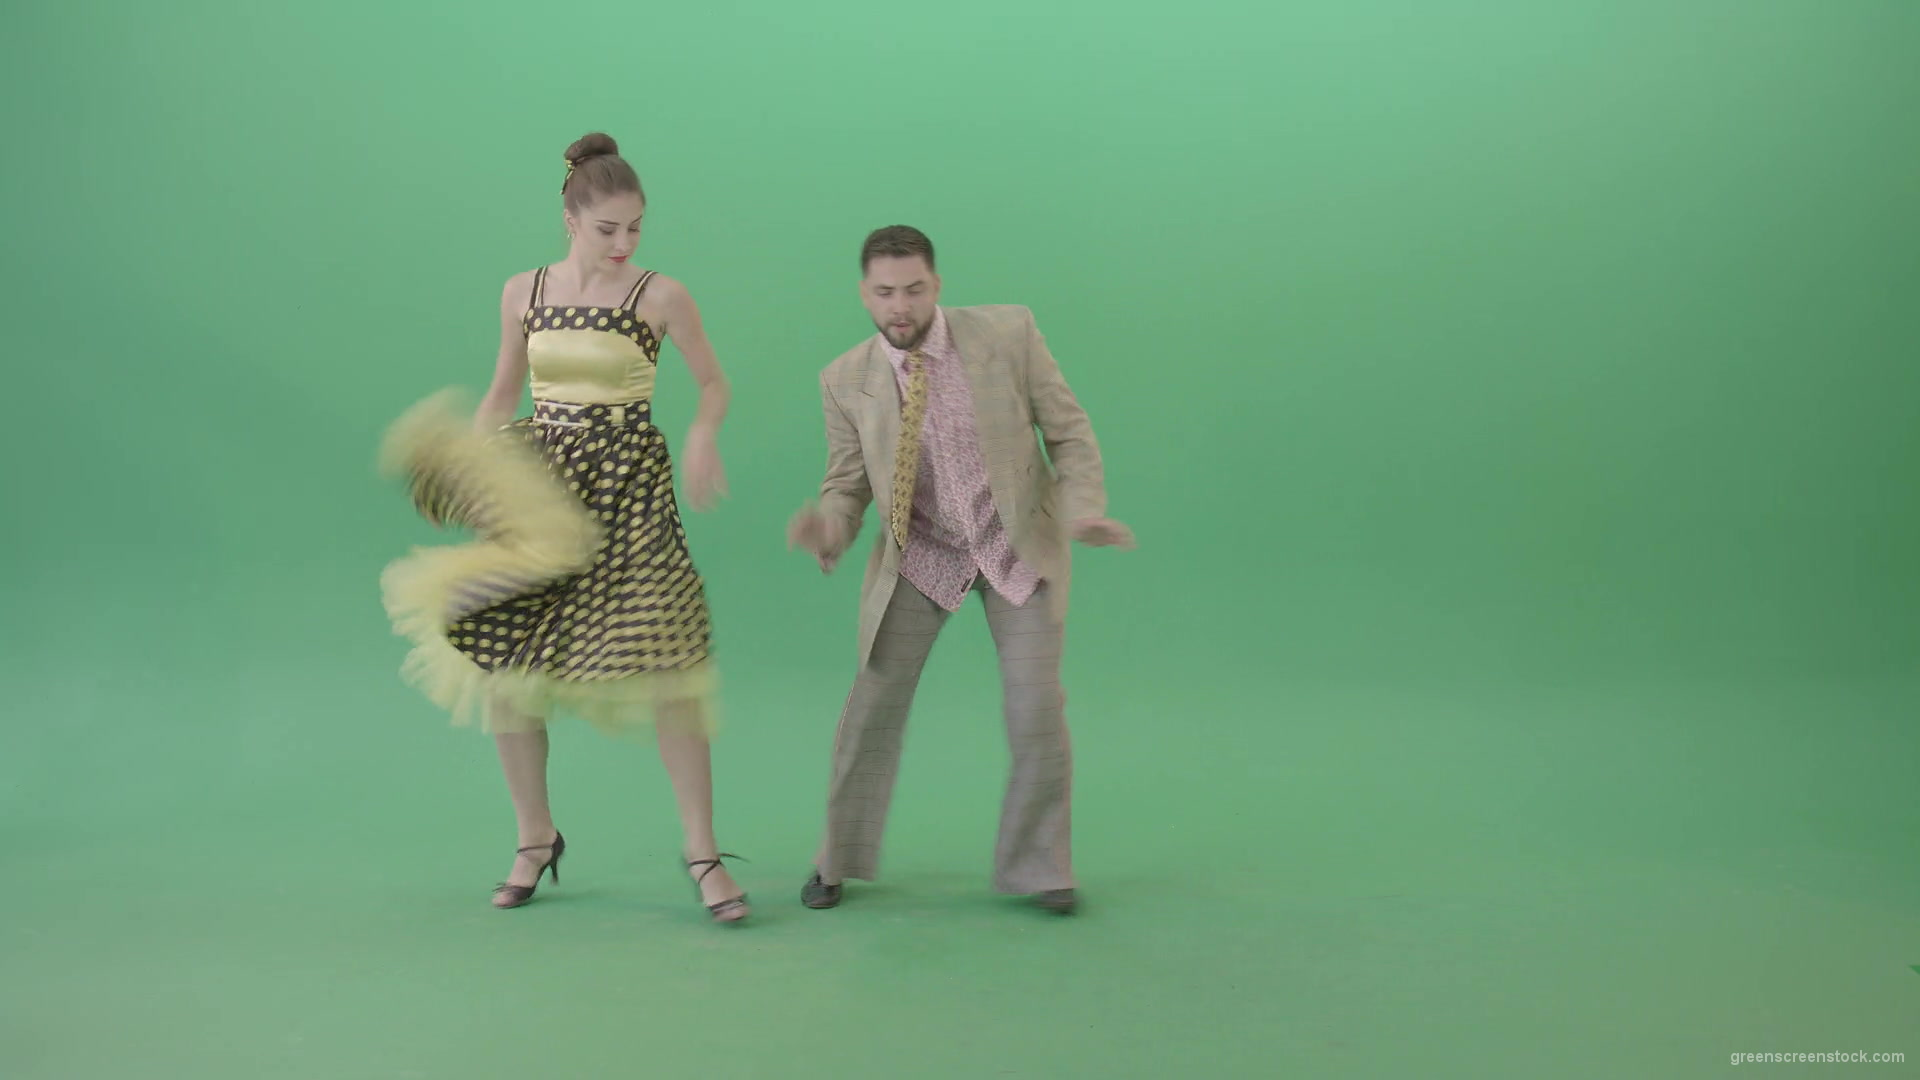 Beautiful-man-and-woman-dancing-Lindy-Hop-Jazz-and-Swing-dance-isolated-on-Green-Screen-4K-Video-Footage-1920_006 Green Screen Stock